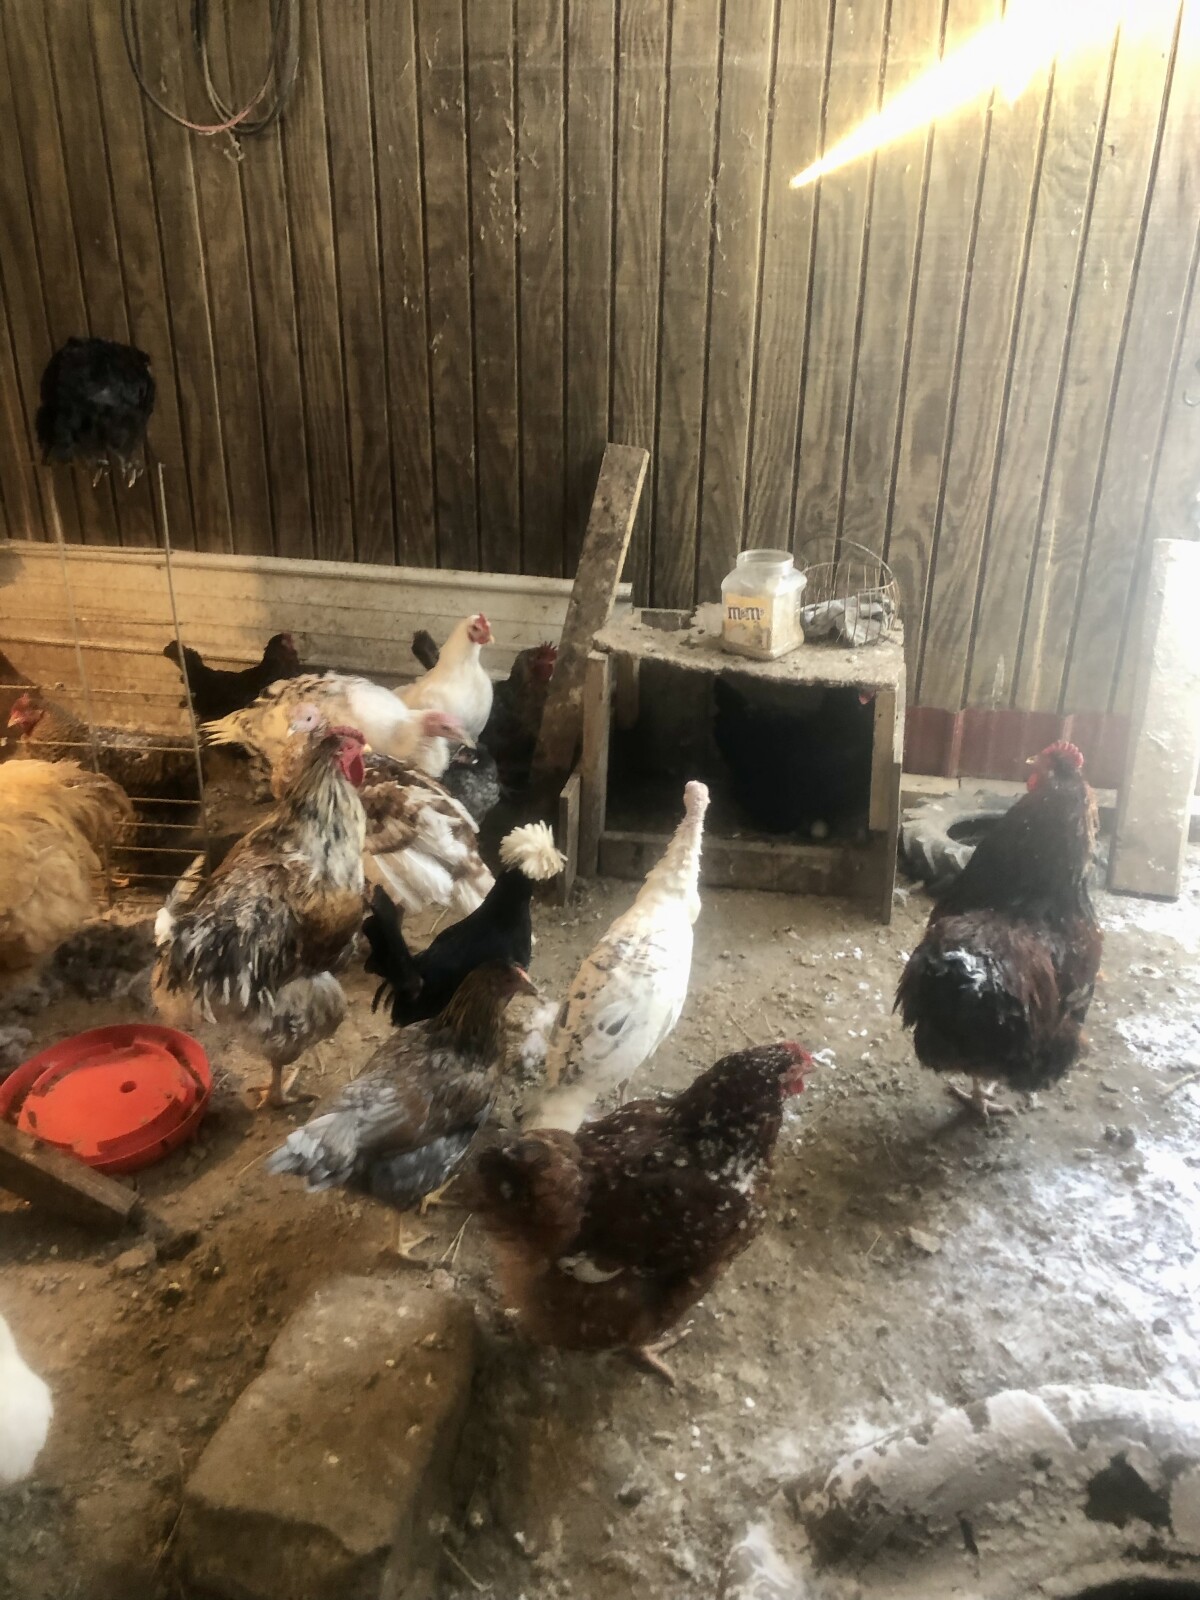 Raising Chickens in You Backyard: A Beginner's Guide